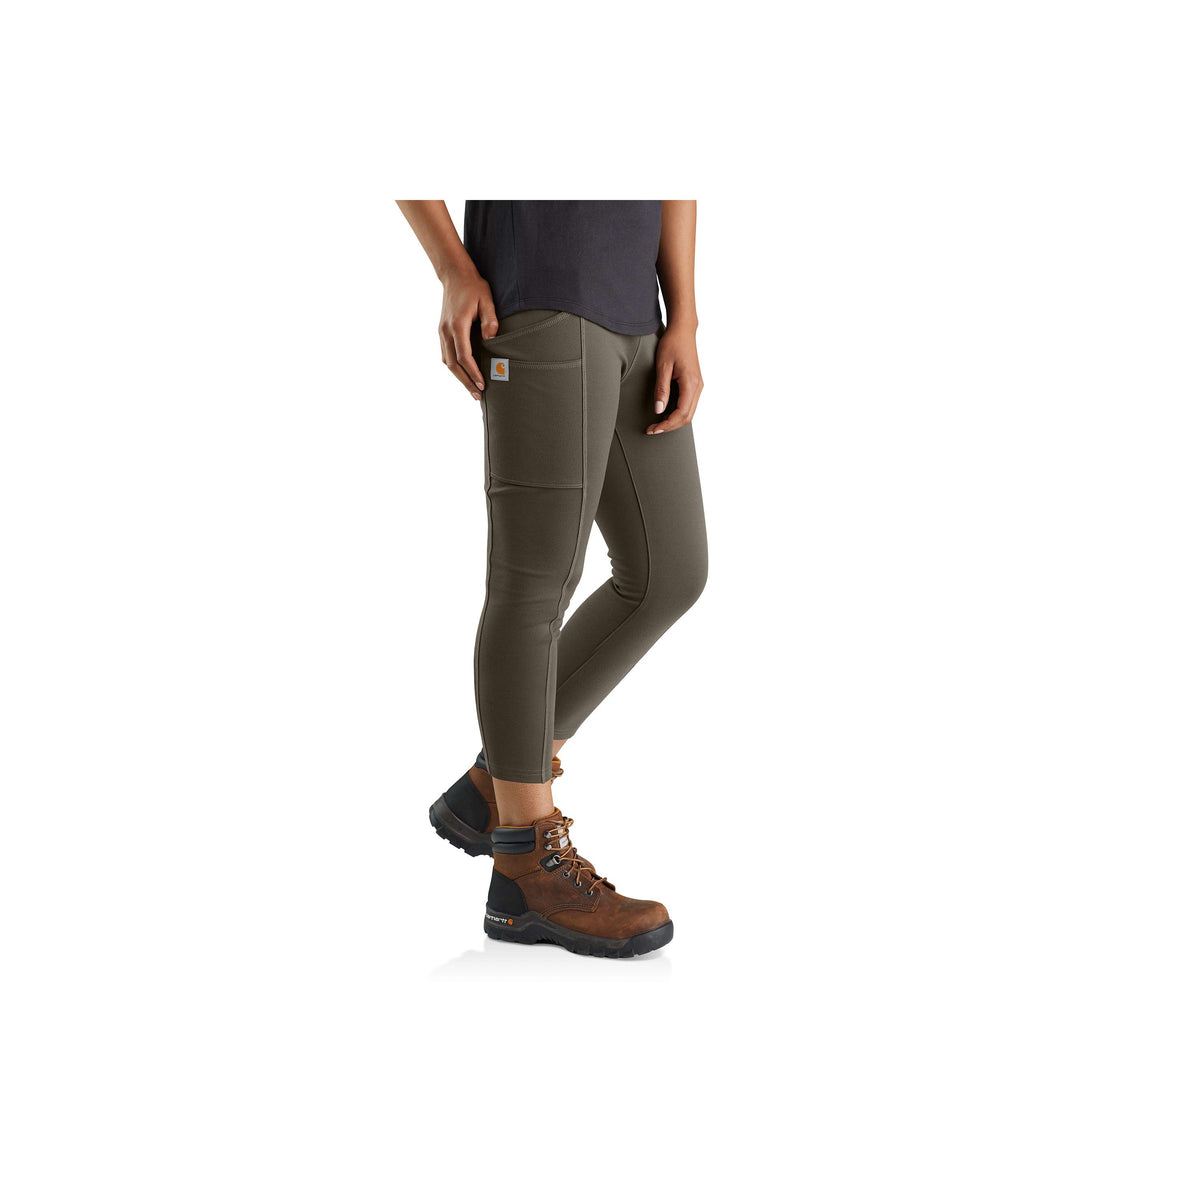 Carhartt on X: Outwork the weather in our new lightweight #Carhartt # leggings that wick sweat to help you get the job done:    / X